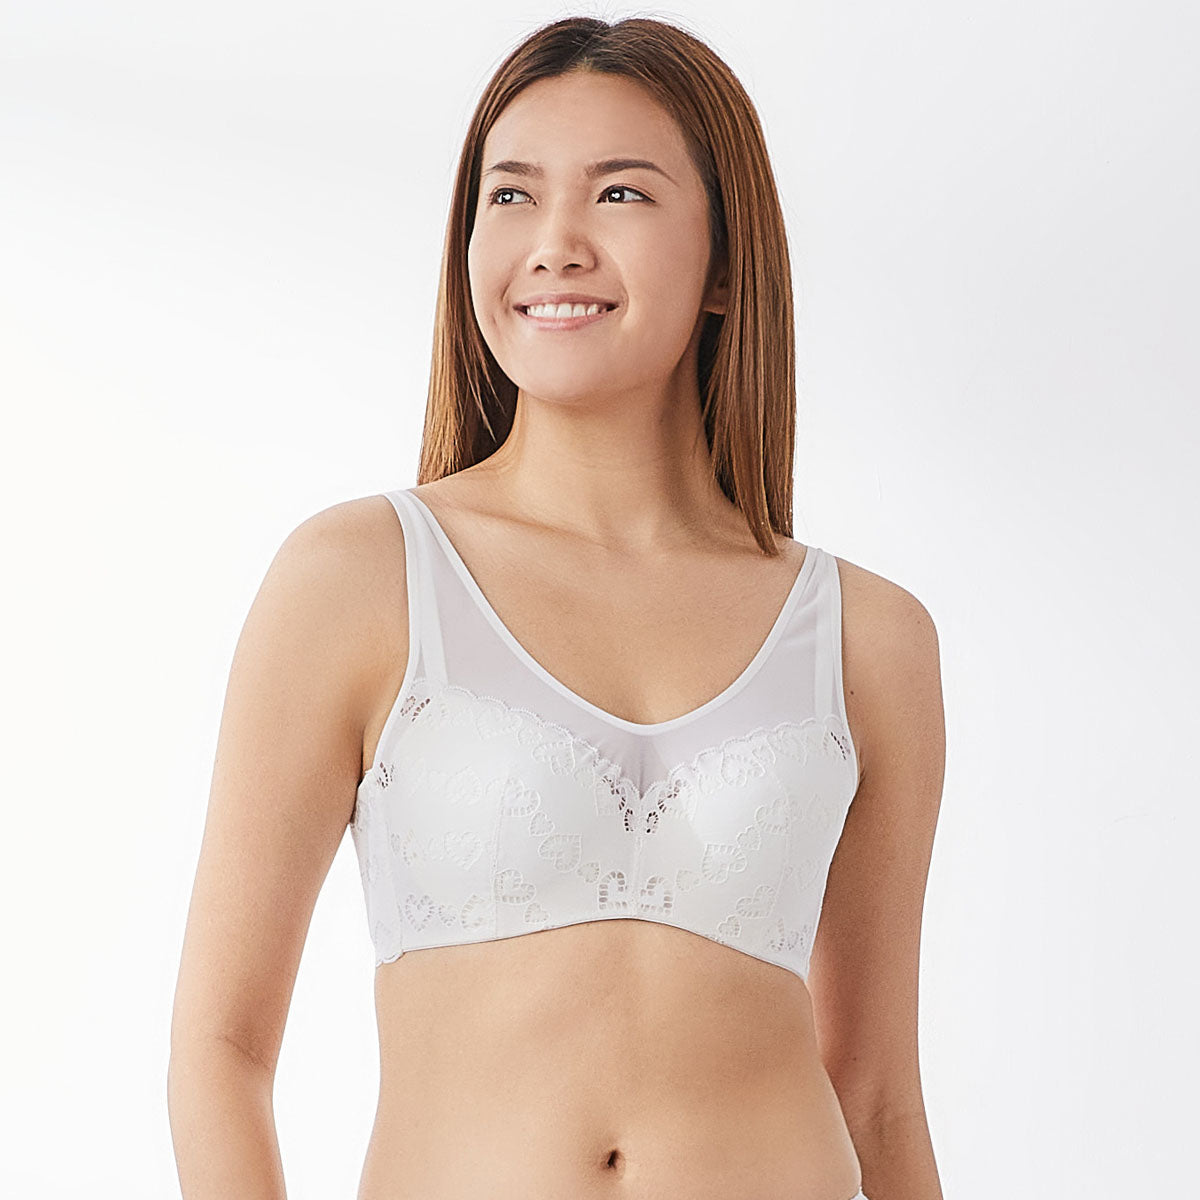 Solution Max Free Ad Grid™ Full Coverage Lightly Lined Lace Bra Her own words Snow White 75C 